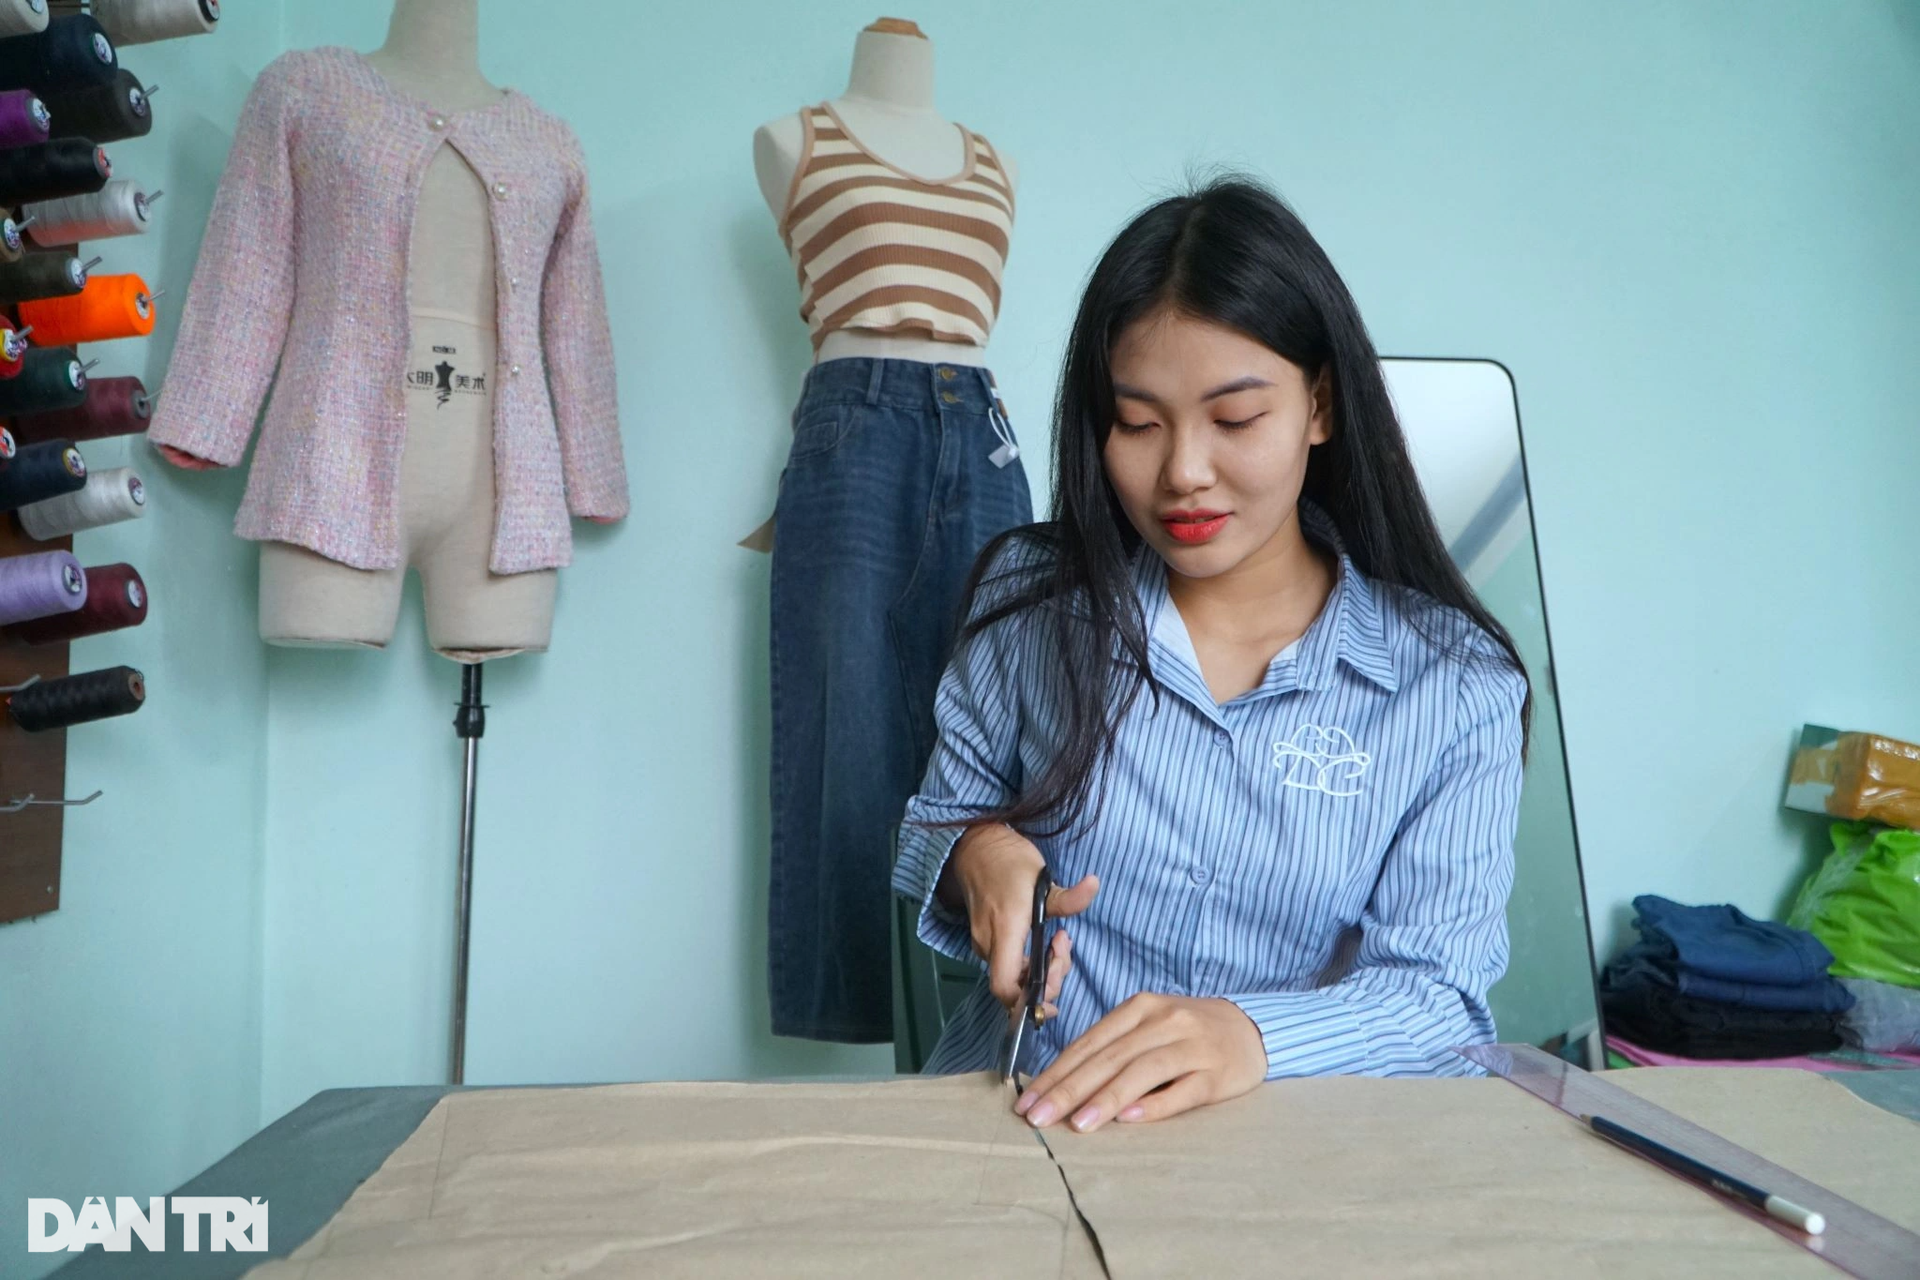 Thanh Hoa hot girl recycles discarded things into fashion products - 10